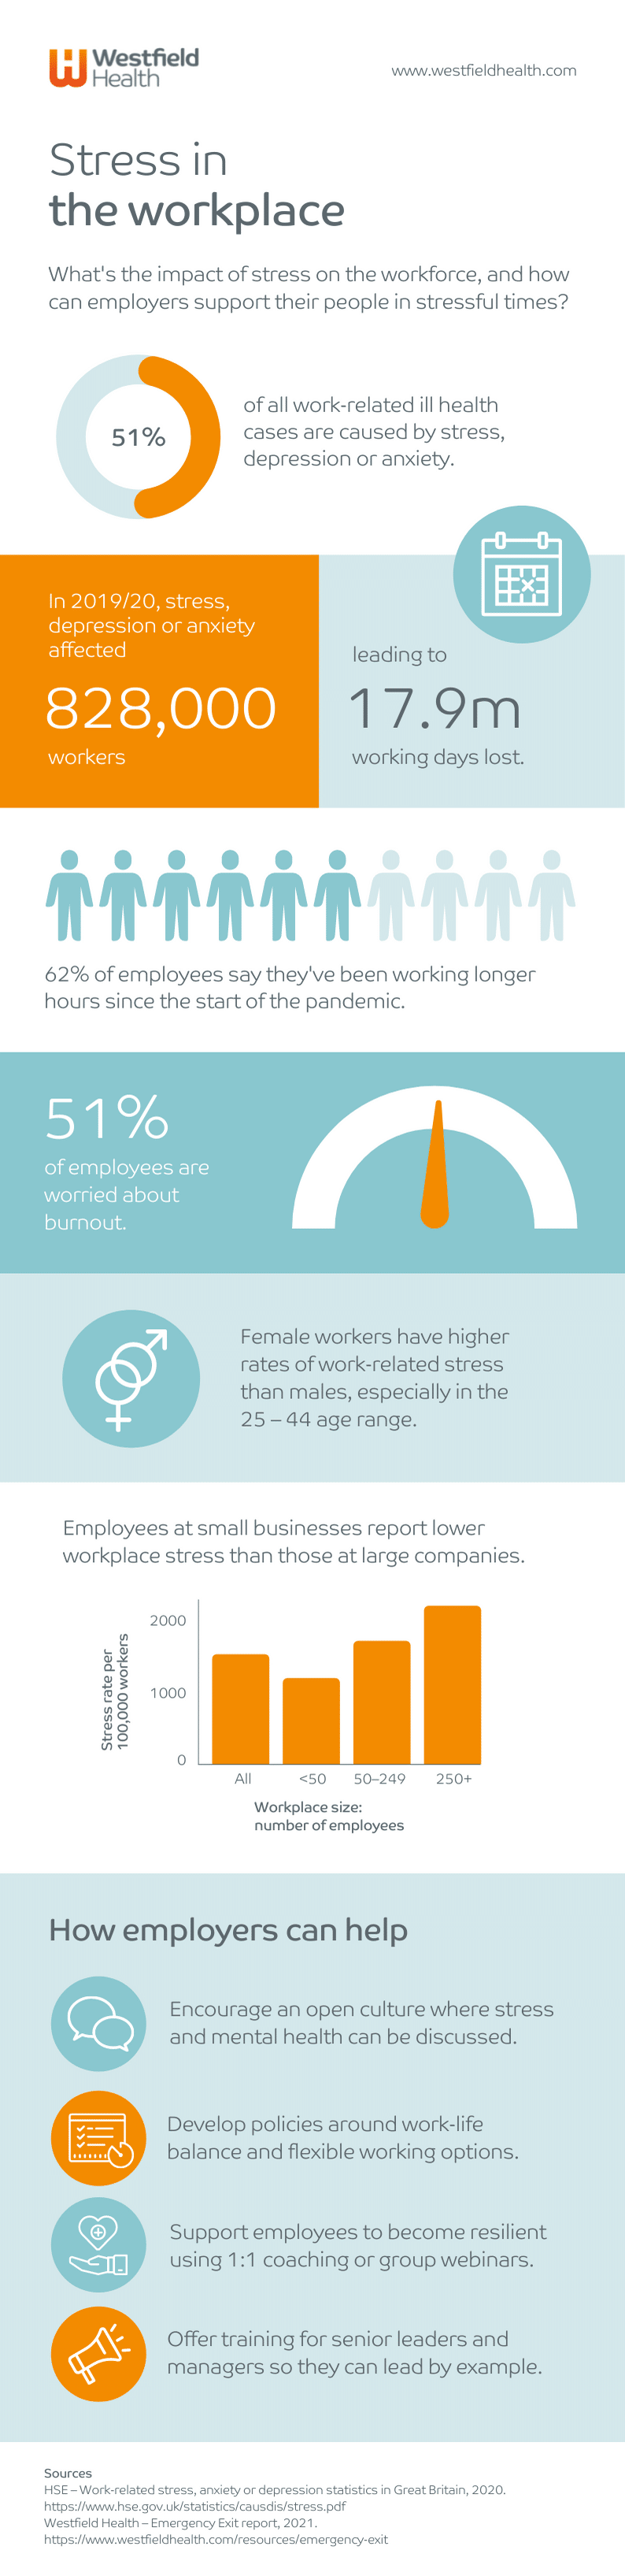 Workplace stress - infographic